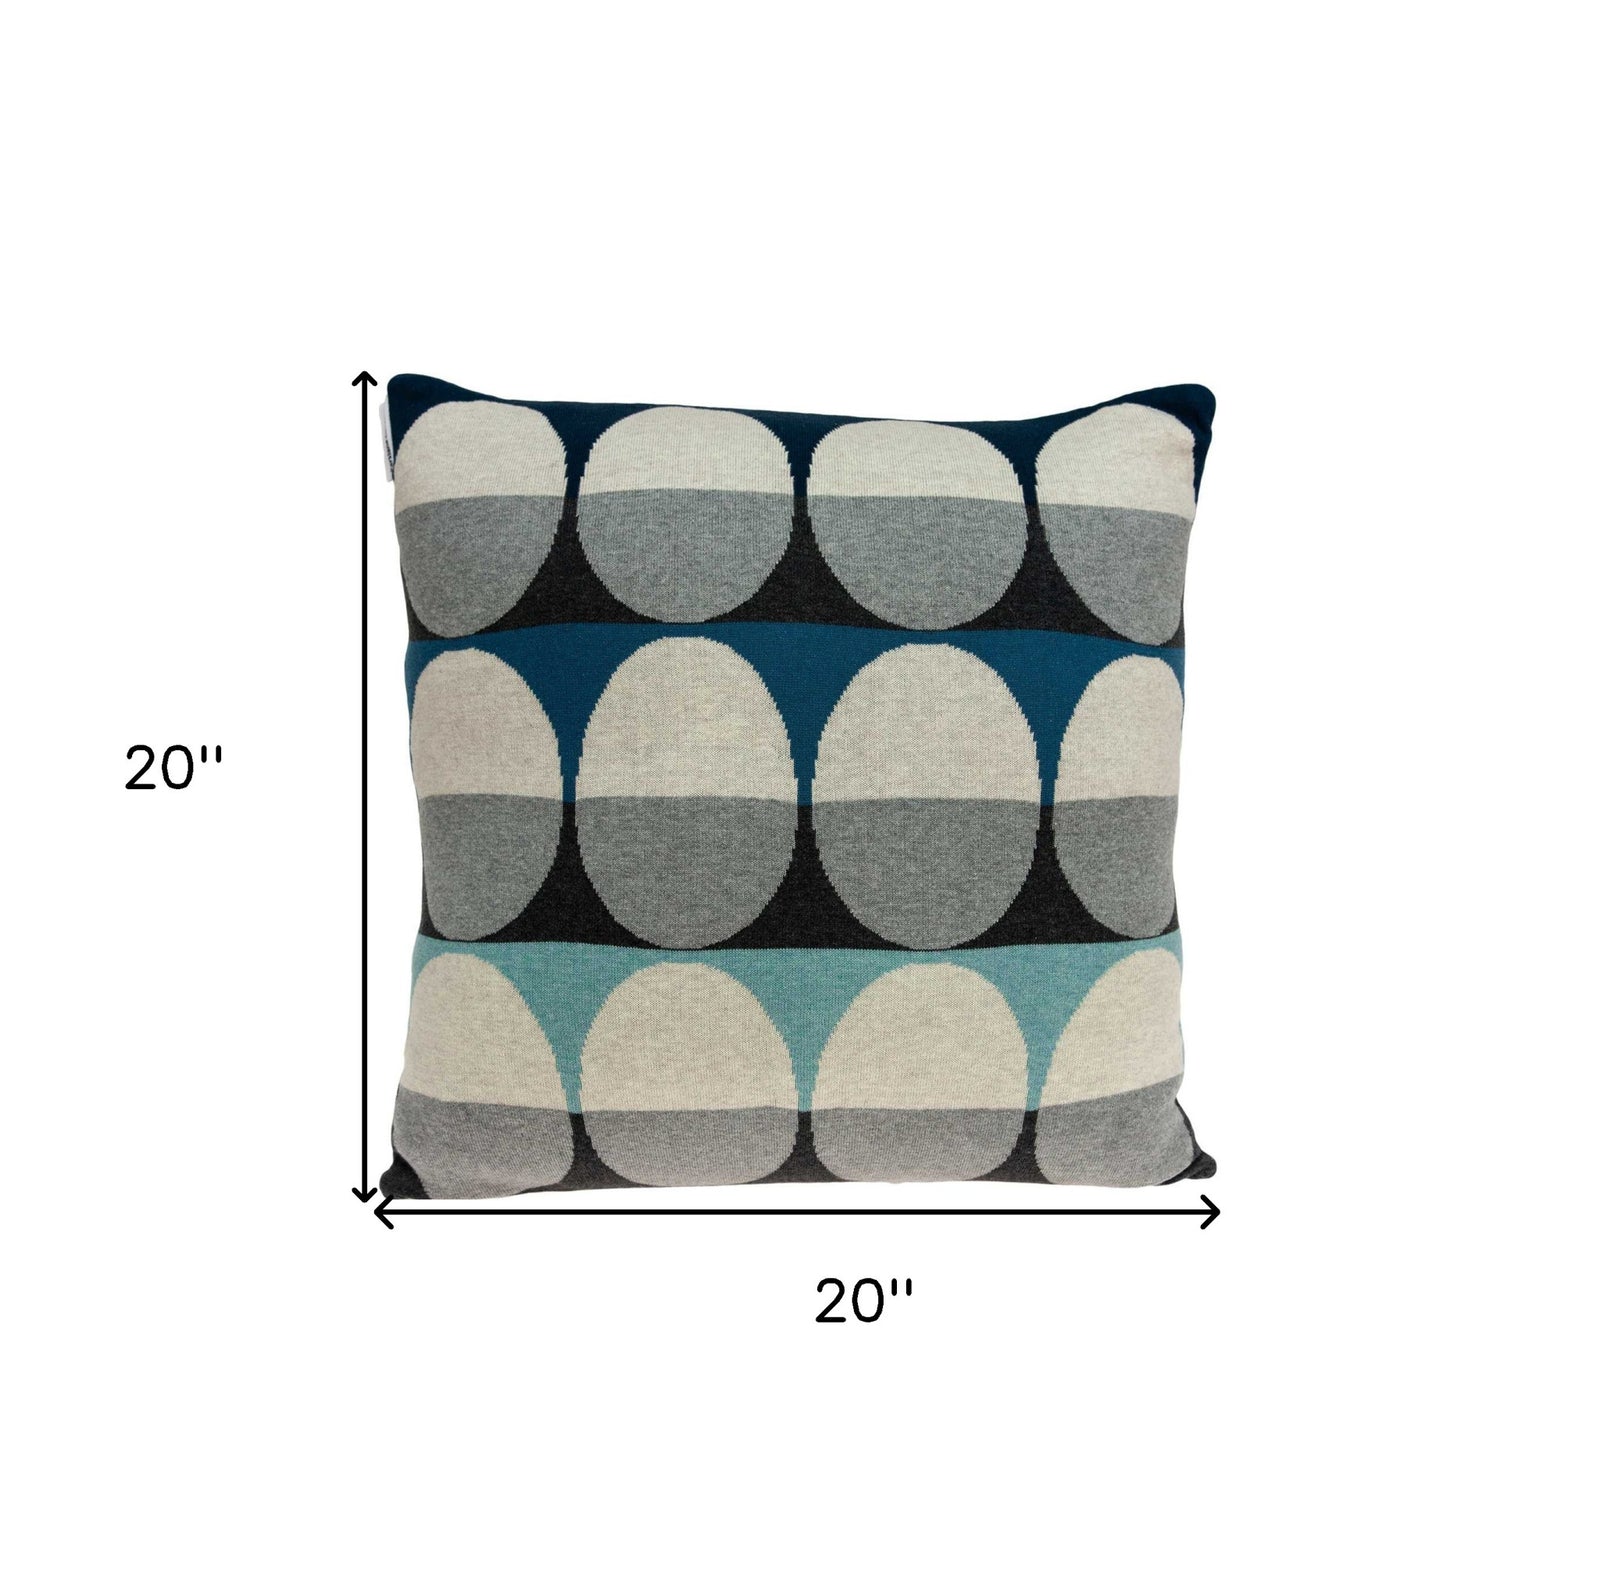 20" X 7" X 20" Transitional Gray And Blue Pillow Cover With Poly Insert